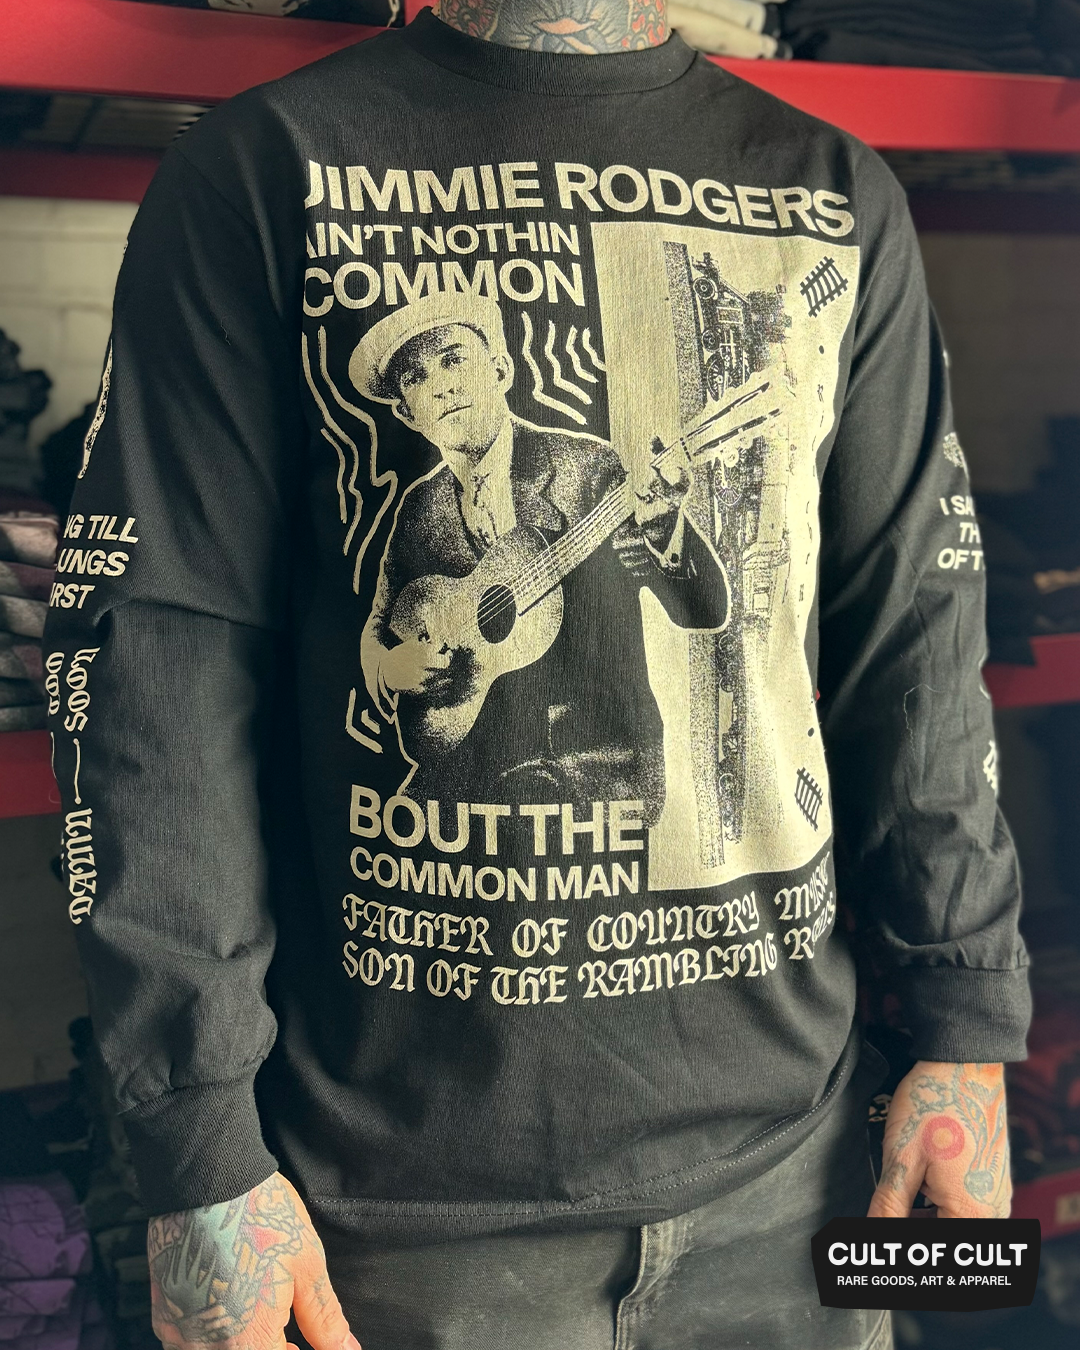 a model pictured from the front, wearing the Jimmie Rodgers black long sleeve shirt